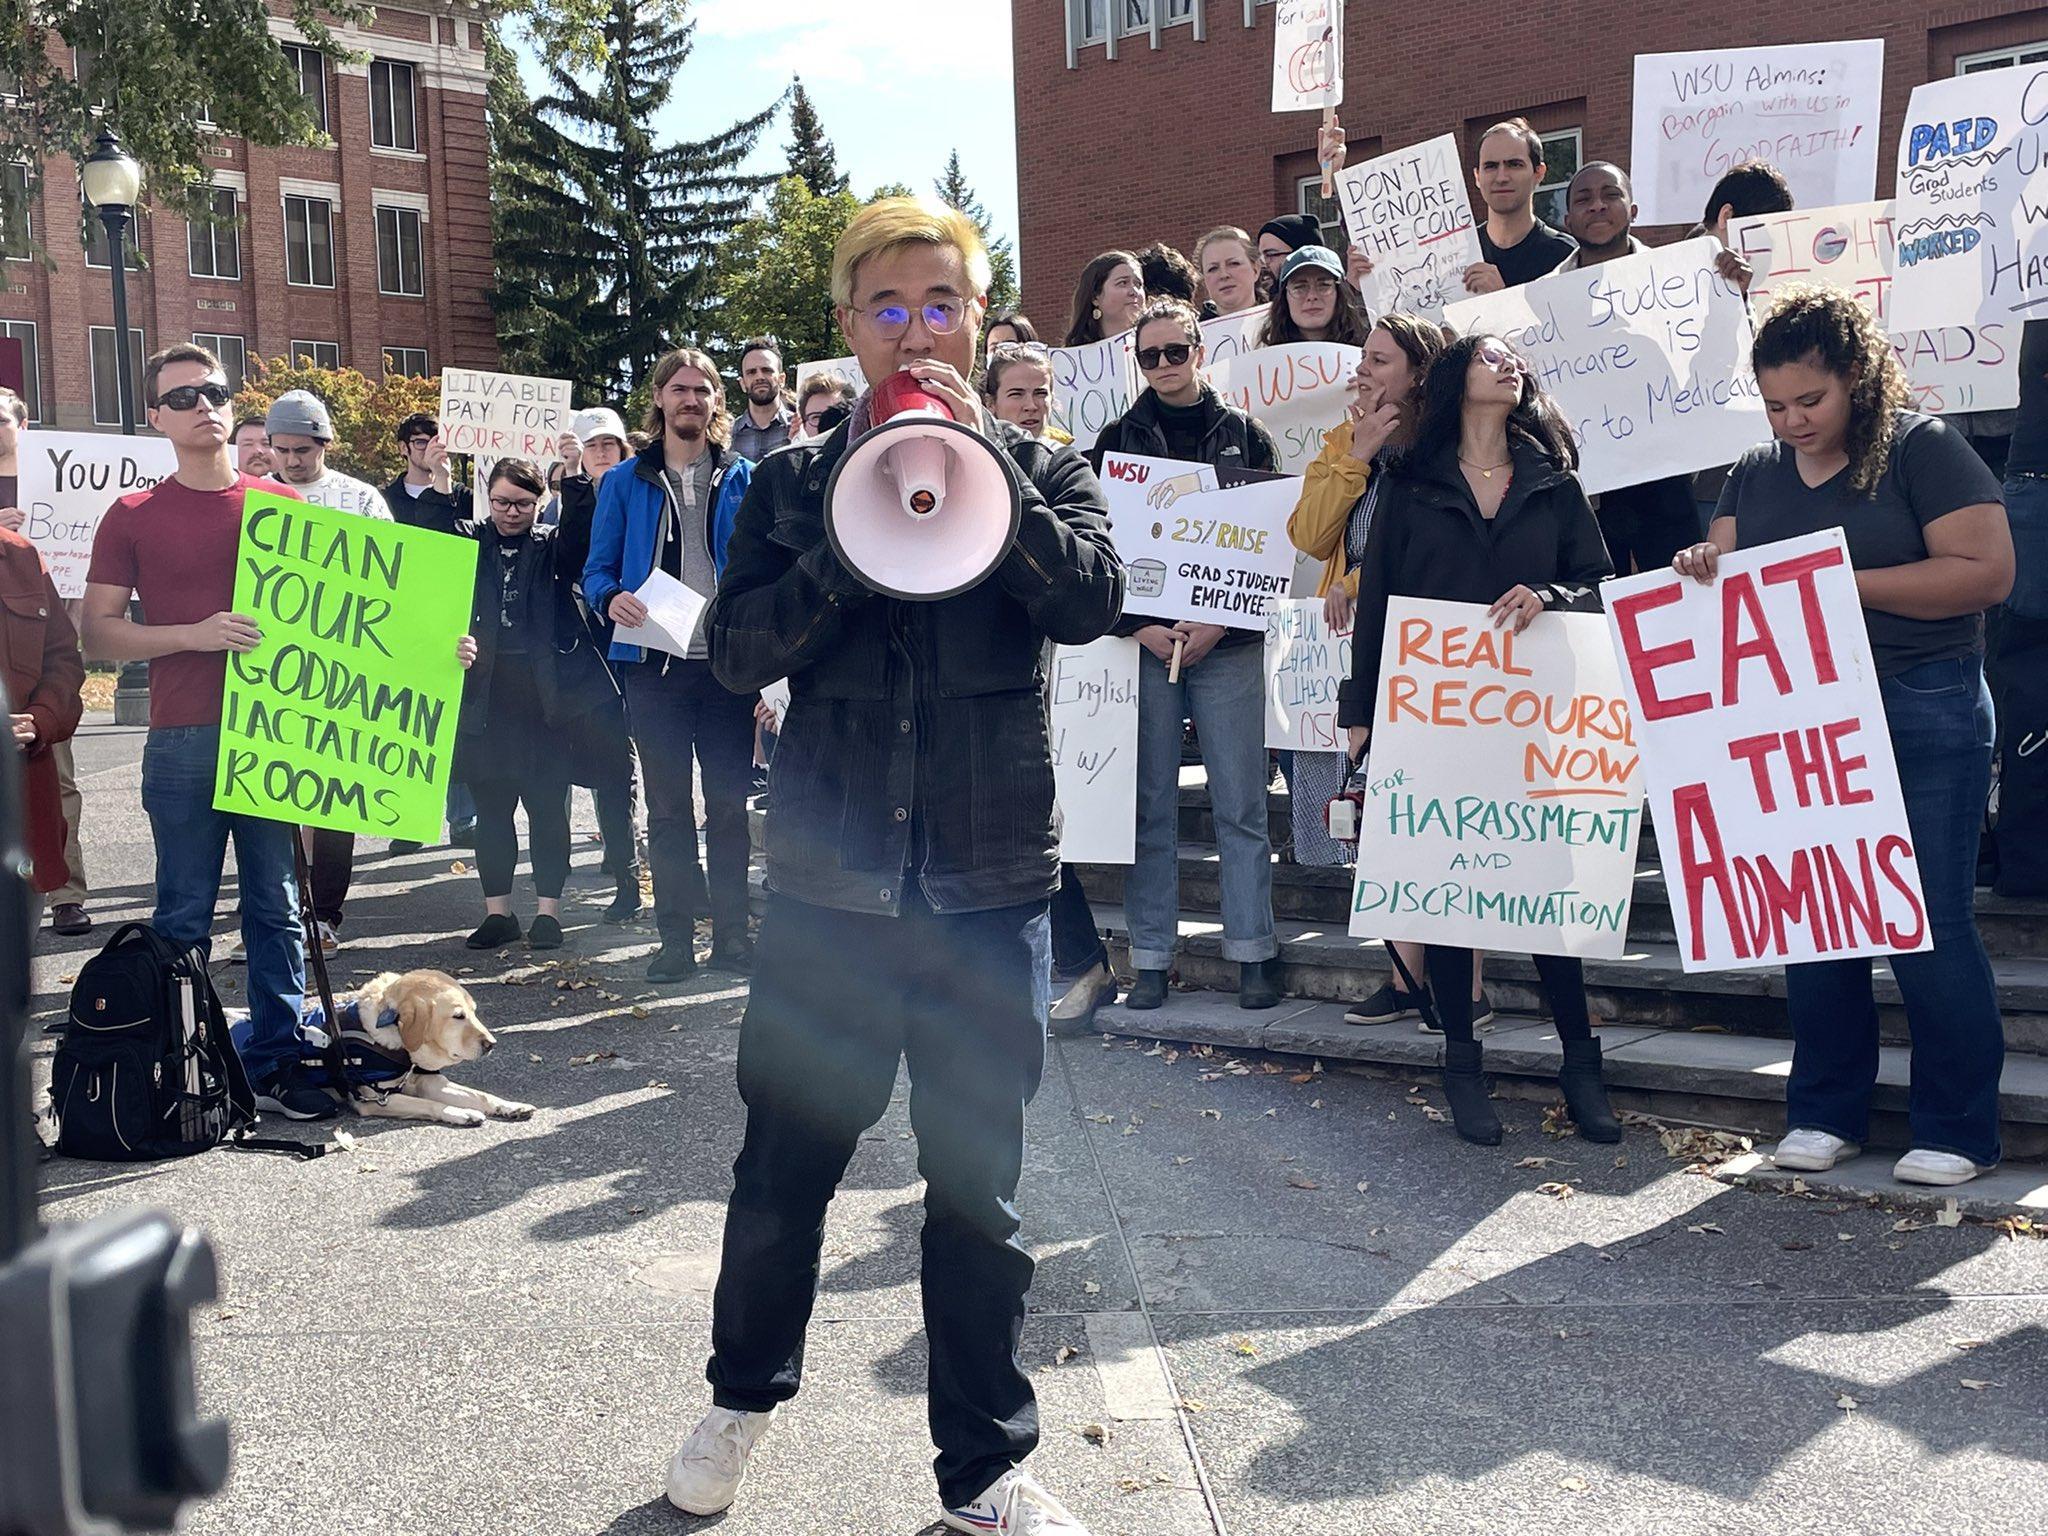 A member of WSU CASE holding a megaphone in front of a large crowd of Academic Student Employees holding signs  